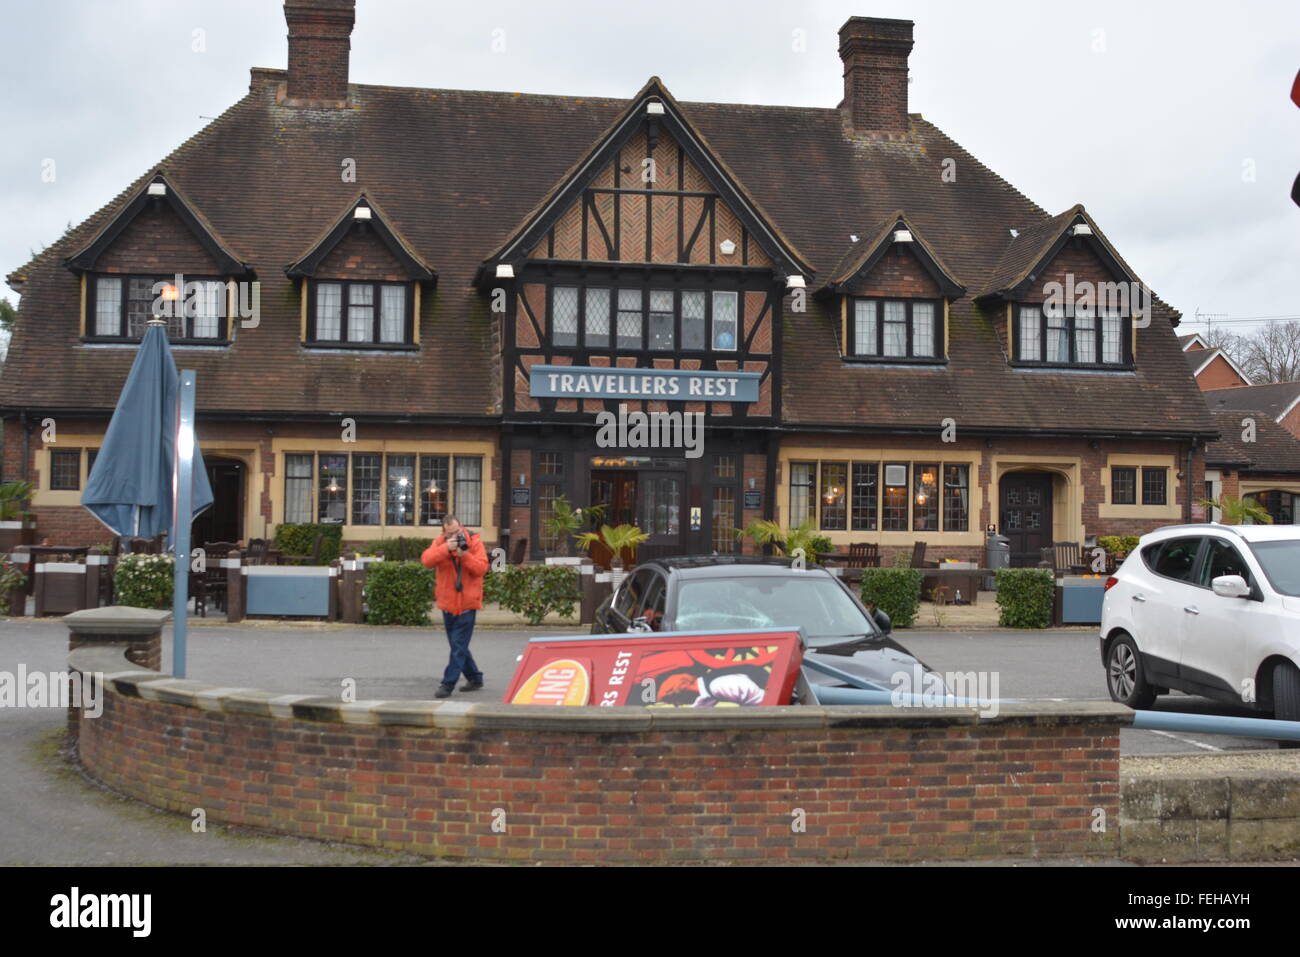 Reading, Berkshire, UK. 07th Feb, 2016. 2014 Plate BMW gets smashed by the Travellers Rest sign outside the premises believed to be caused by the high speed wind, on the Henley road in Reading. Management would not comment on the subject. Credit:  Charles Dye/Paul King/Alamy Live News Stock Photo